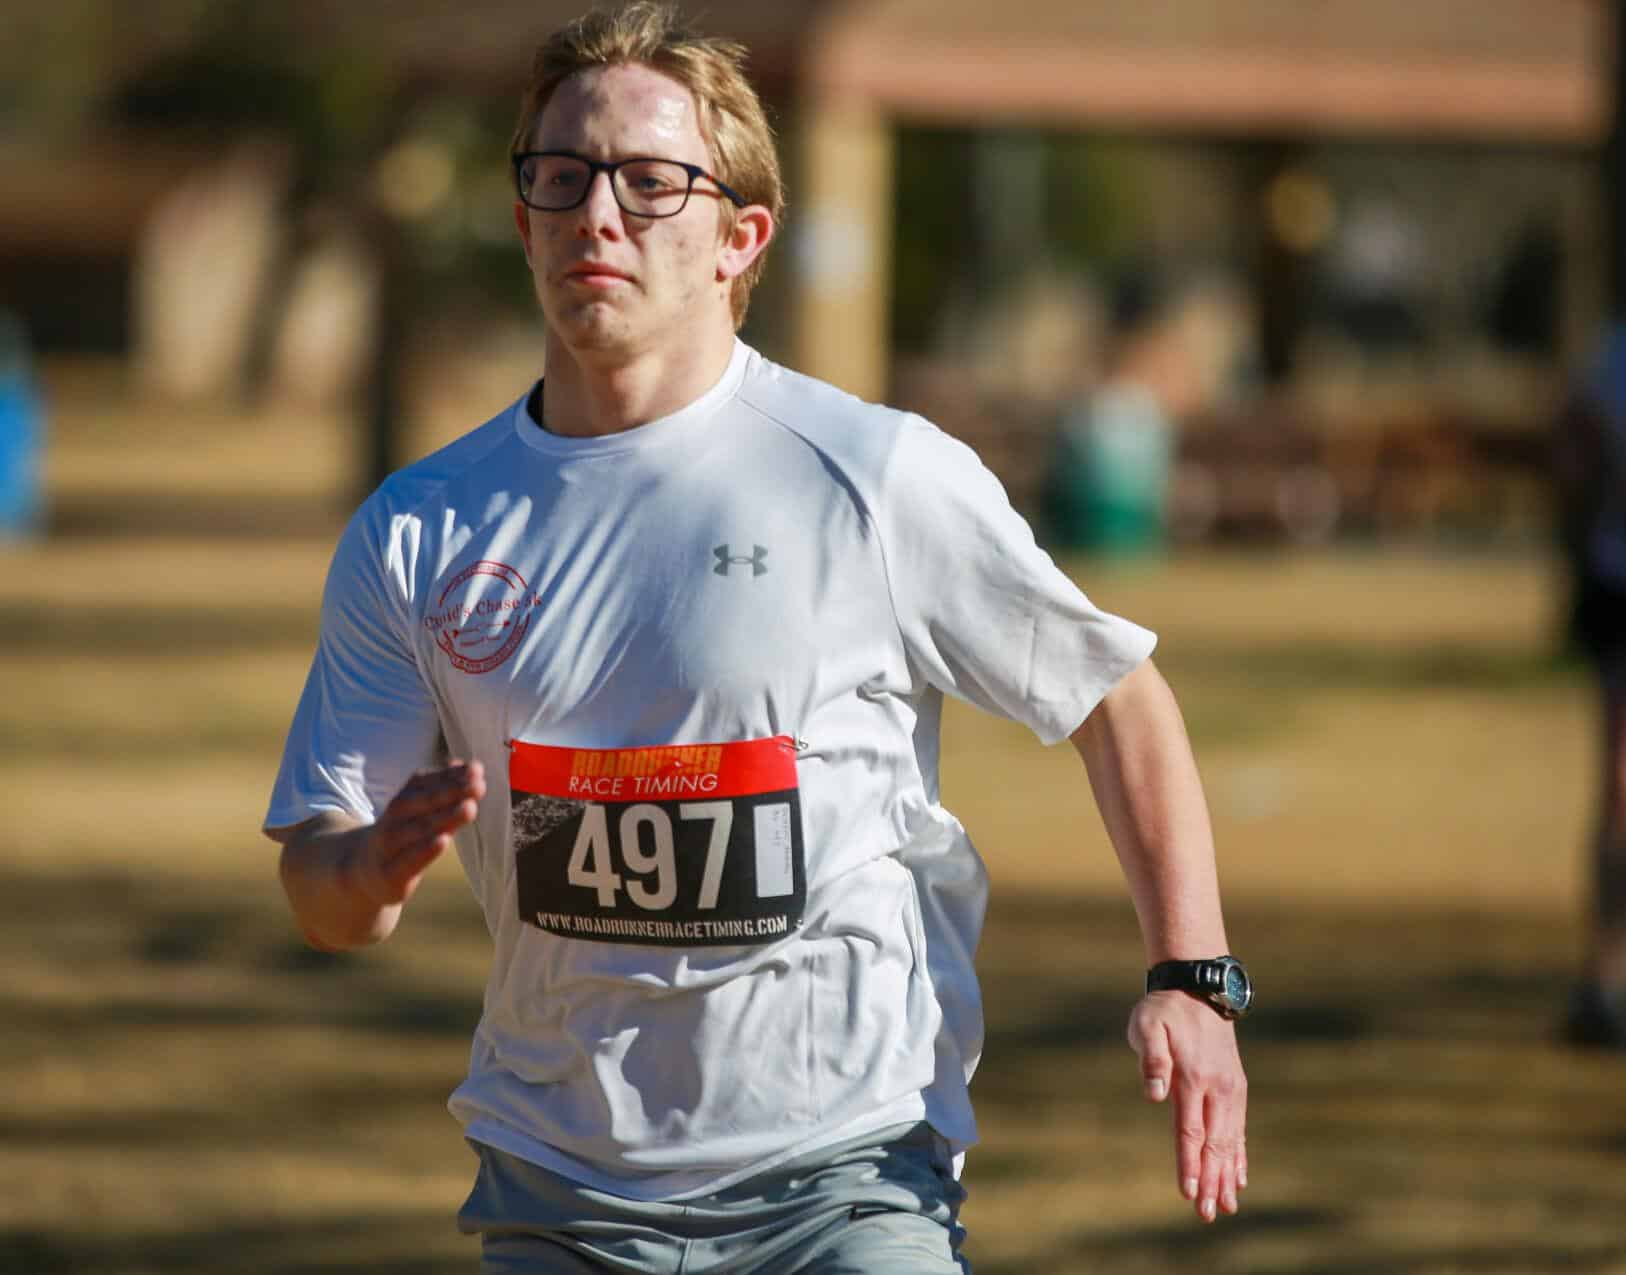 Anthony Destrini runs the Cupid's Chase 5K on February 12, 2022 at Reid Park. The Cupid's Chase 5K Run is a part of the national 5k series in support of people with disabilities. Ana Beltran, Arizona Daily Star - tucson.com